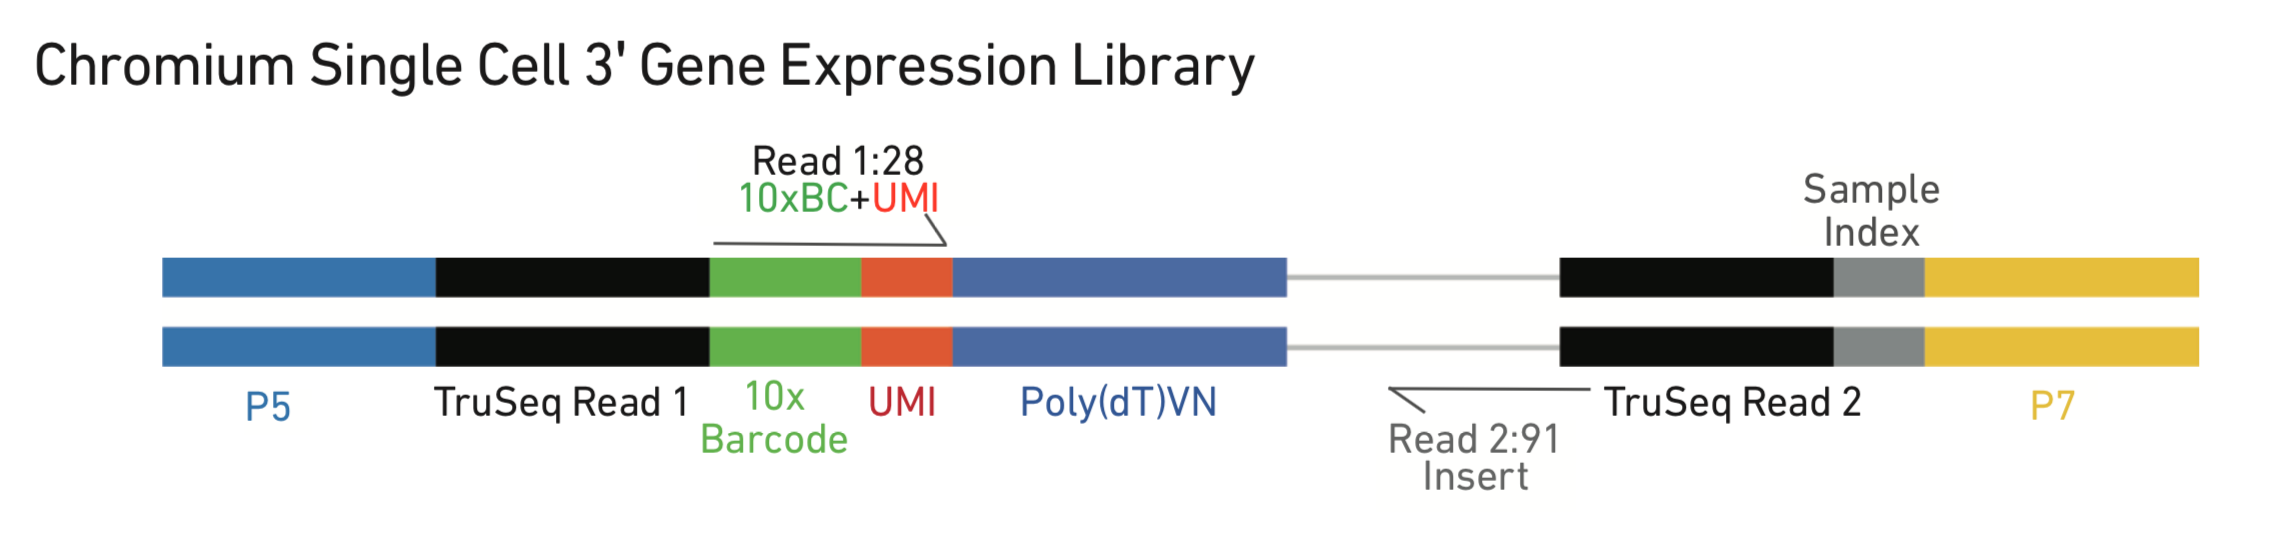 model of final 10x library